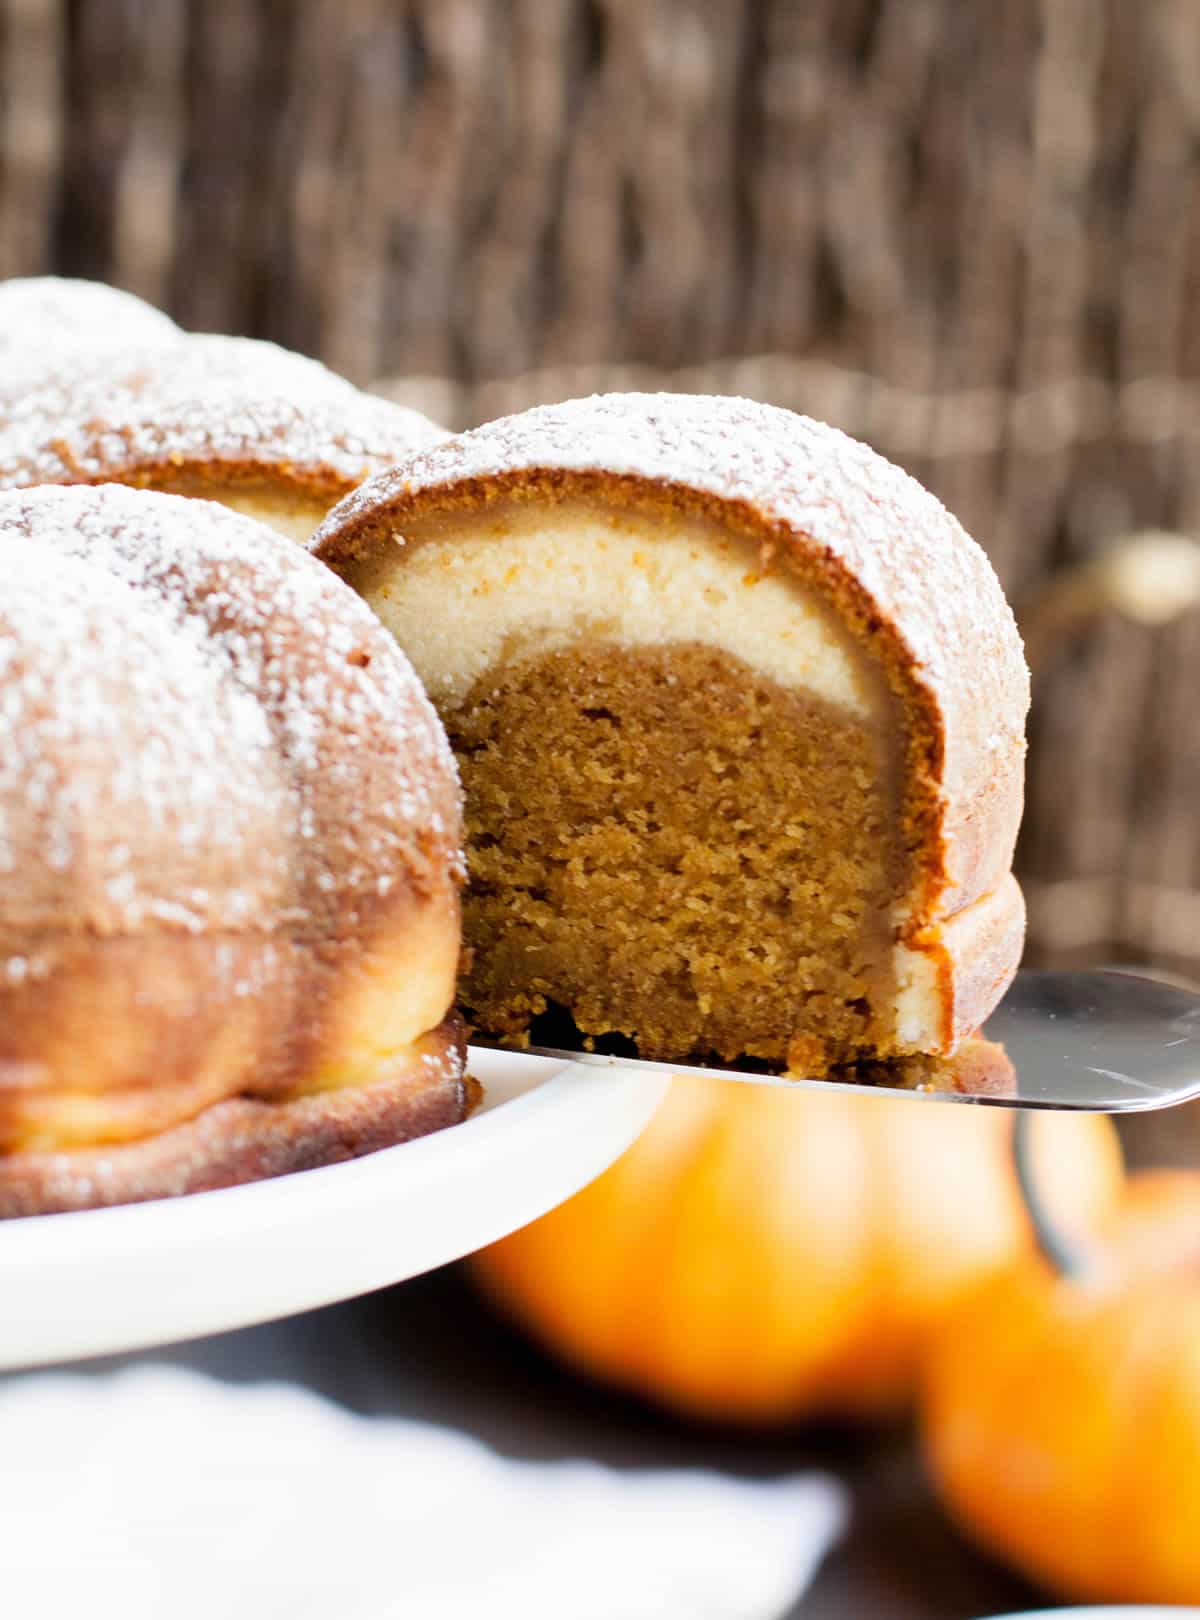 Pumpkin Ricotta Bundt Cake. Pour a sweet ricotta custard over the batter before baking. It will magically bake into a lovely swirl in this delicious cake.